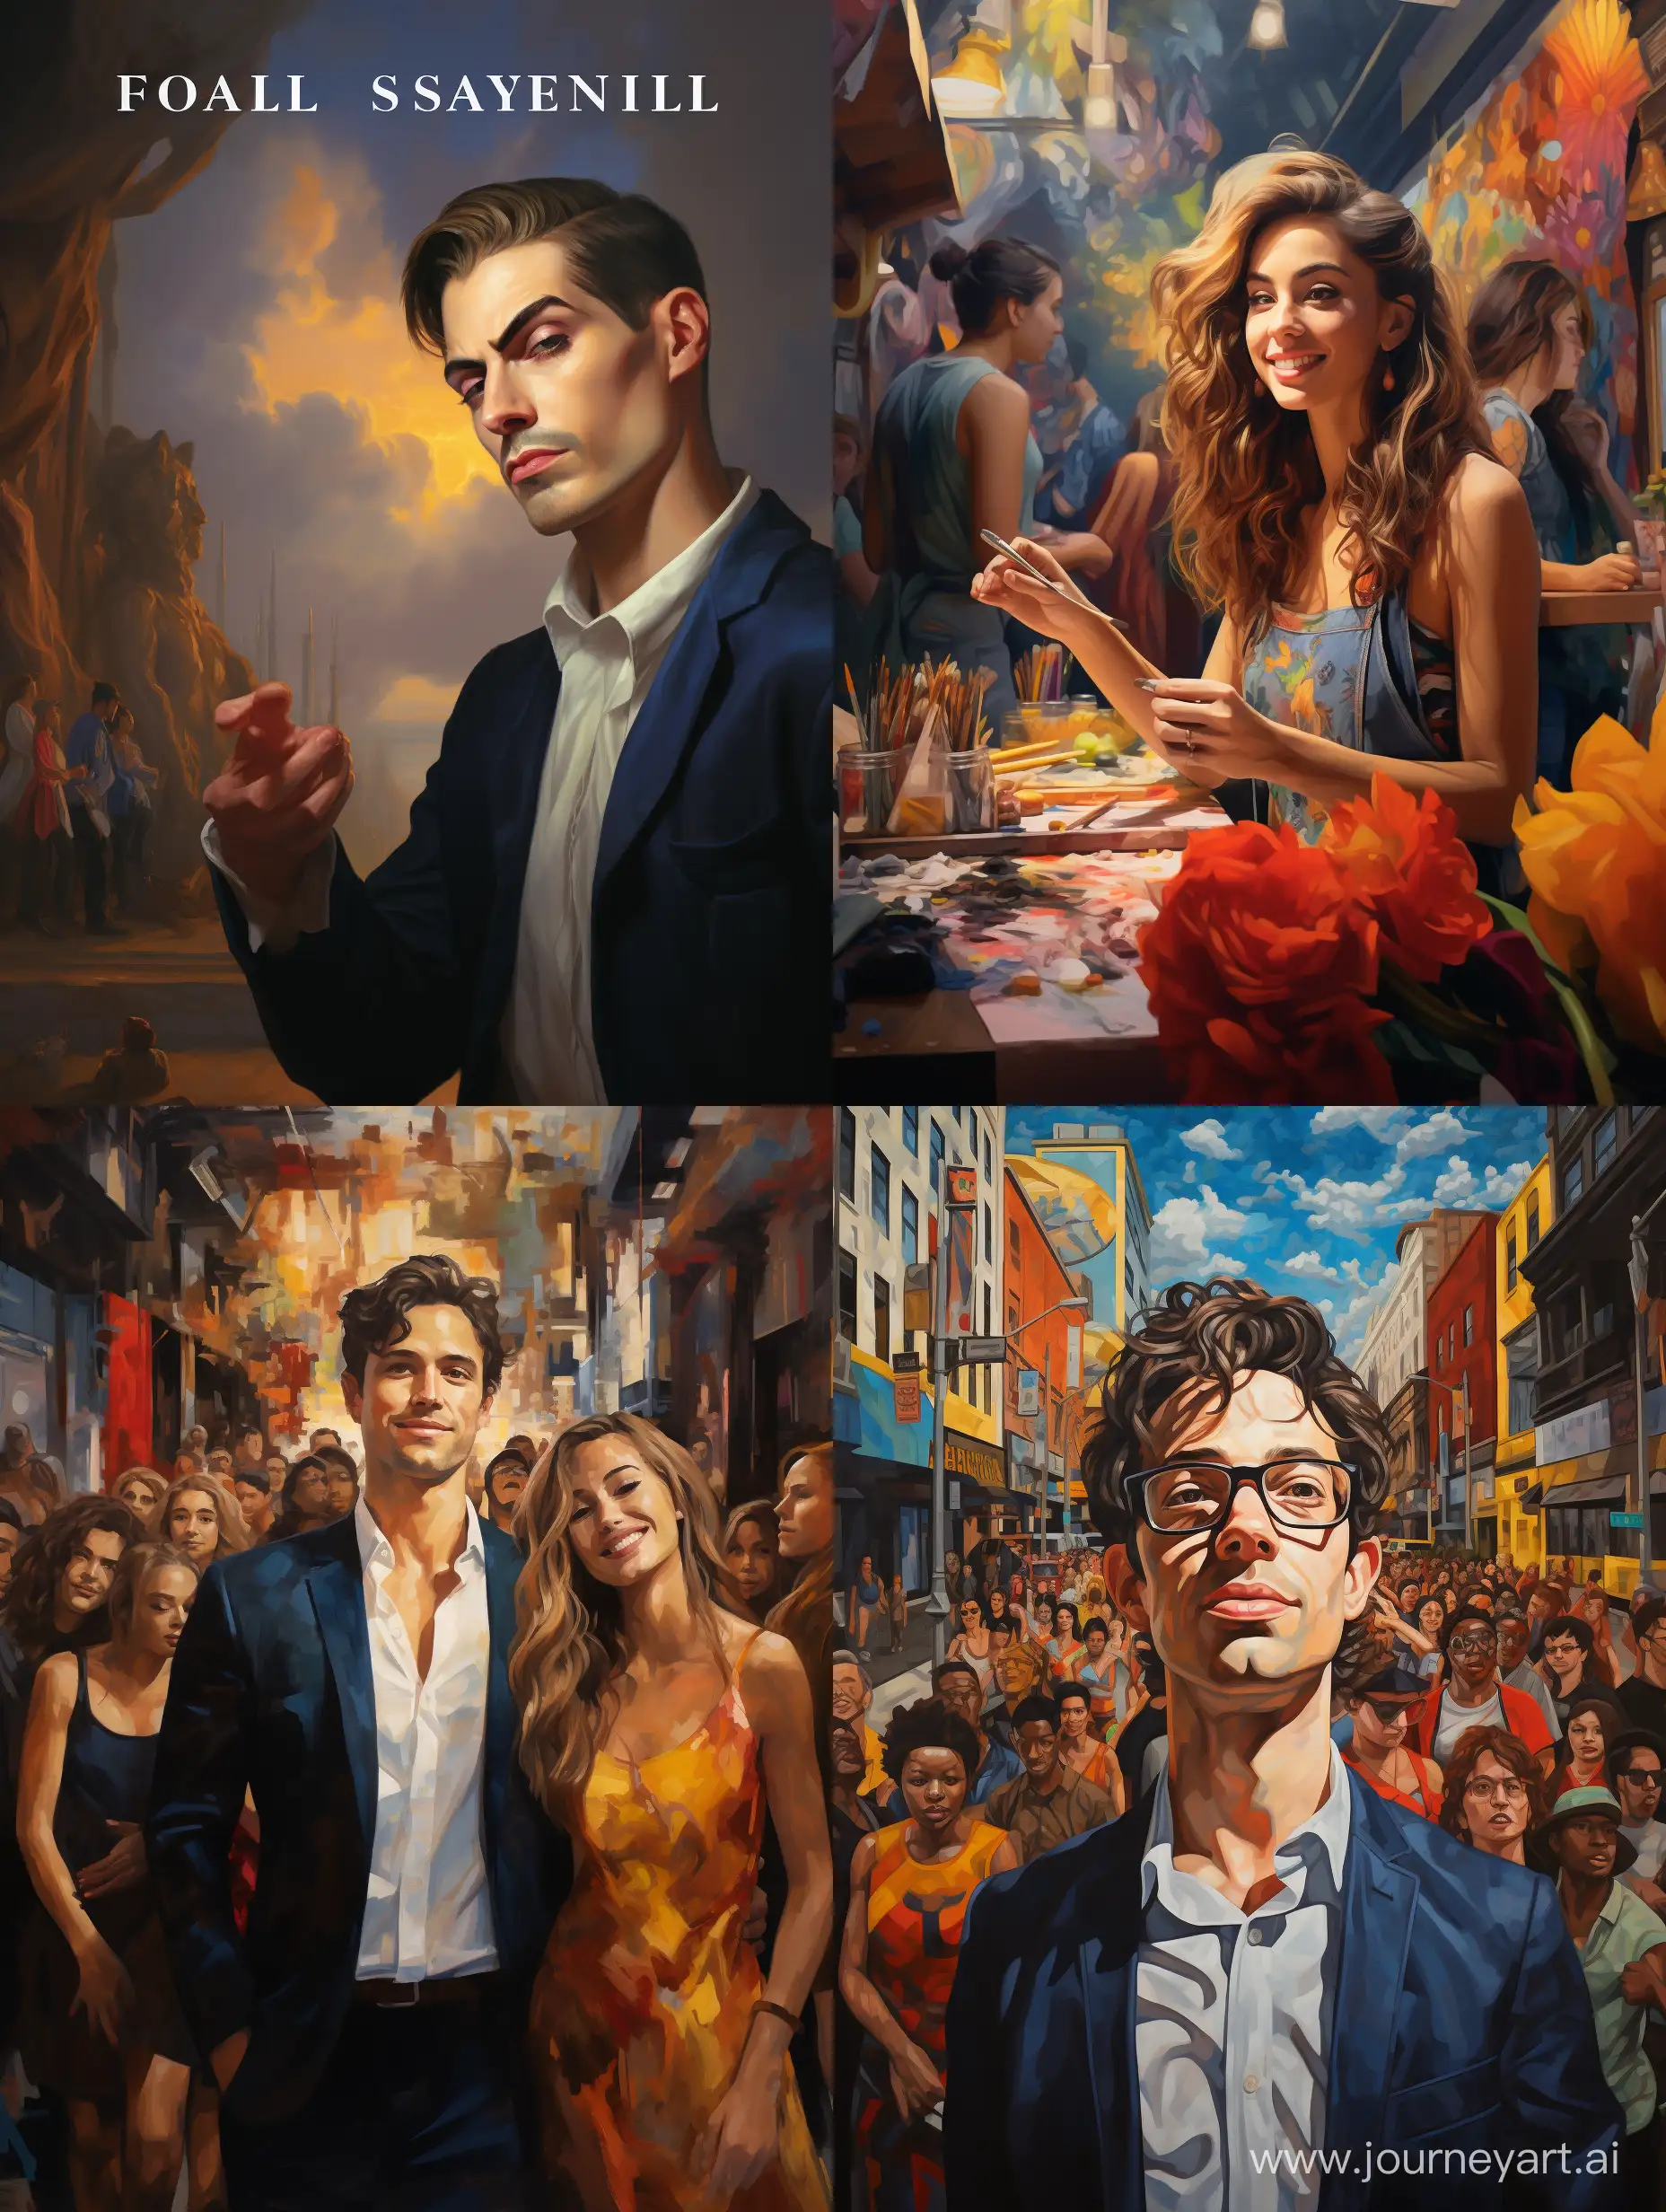 Produce an oil paint-style scene portraying a person confidently presenting their public face to the world, set in a dynamic or vibrant environment.